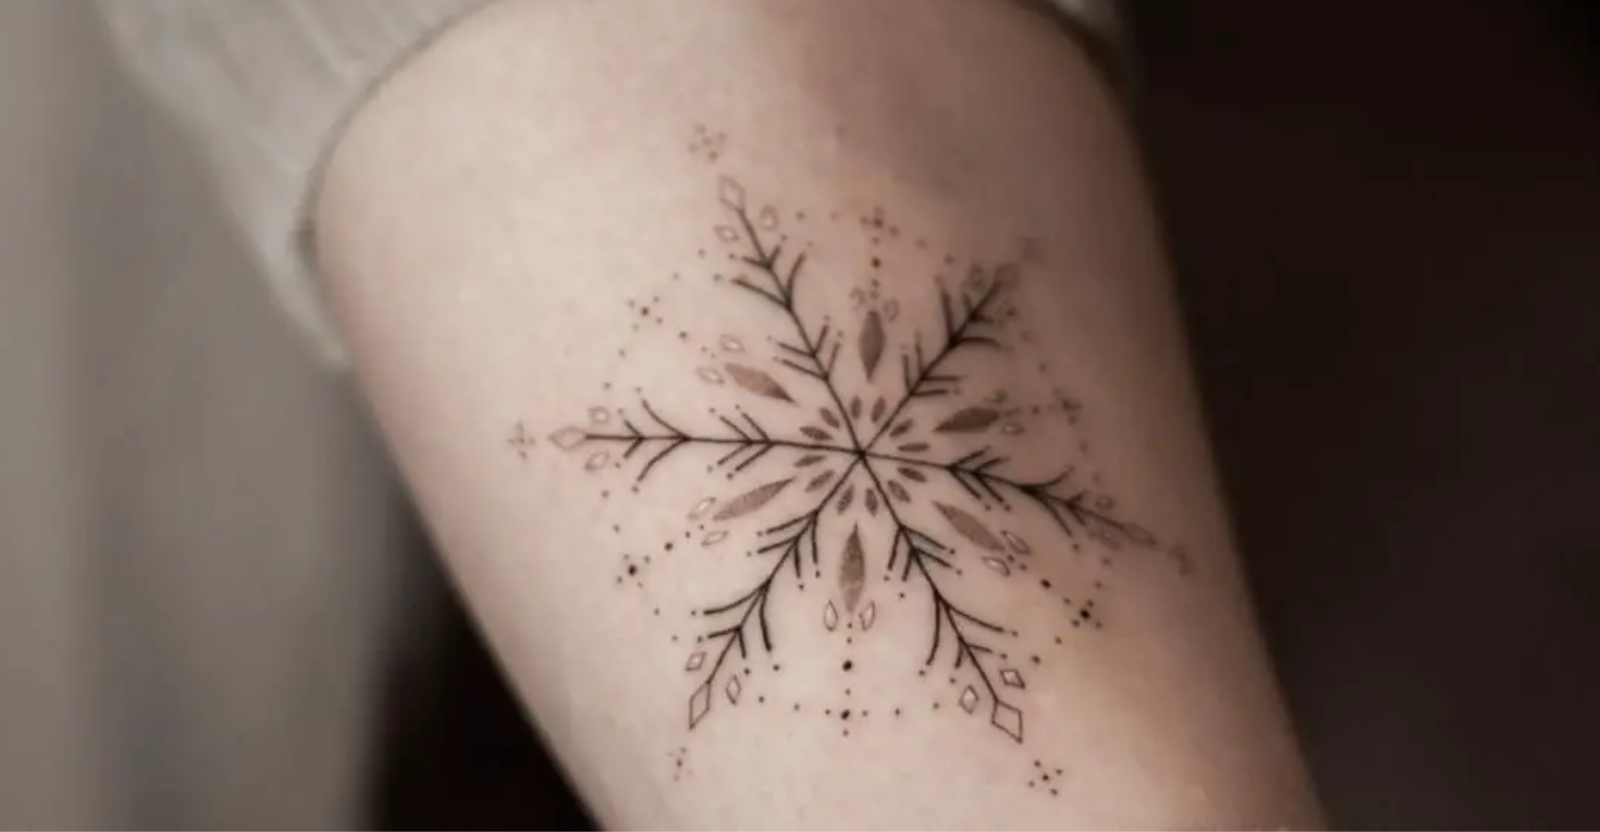 Snowflake tattoo on the right inner arm.